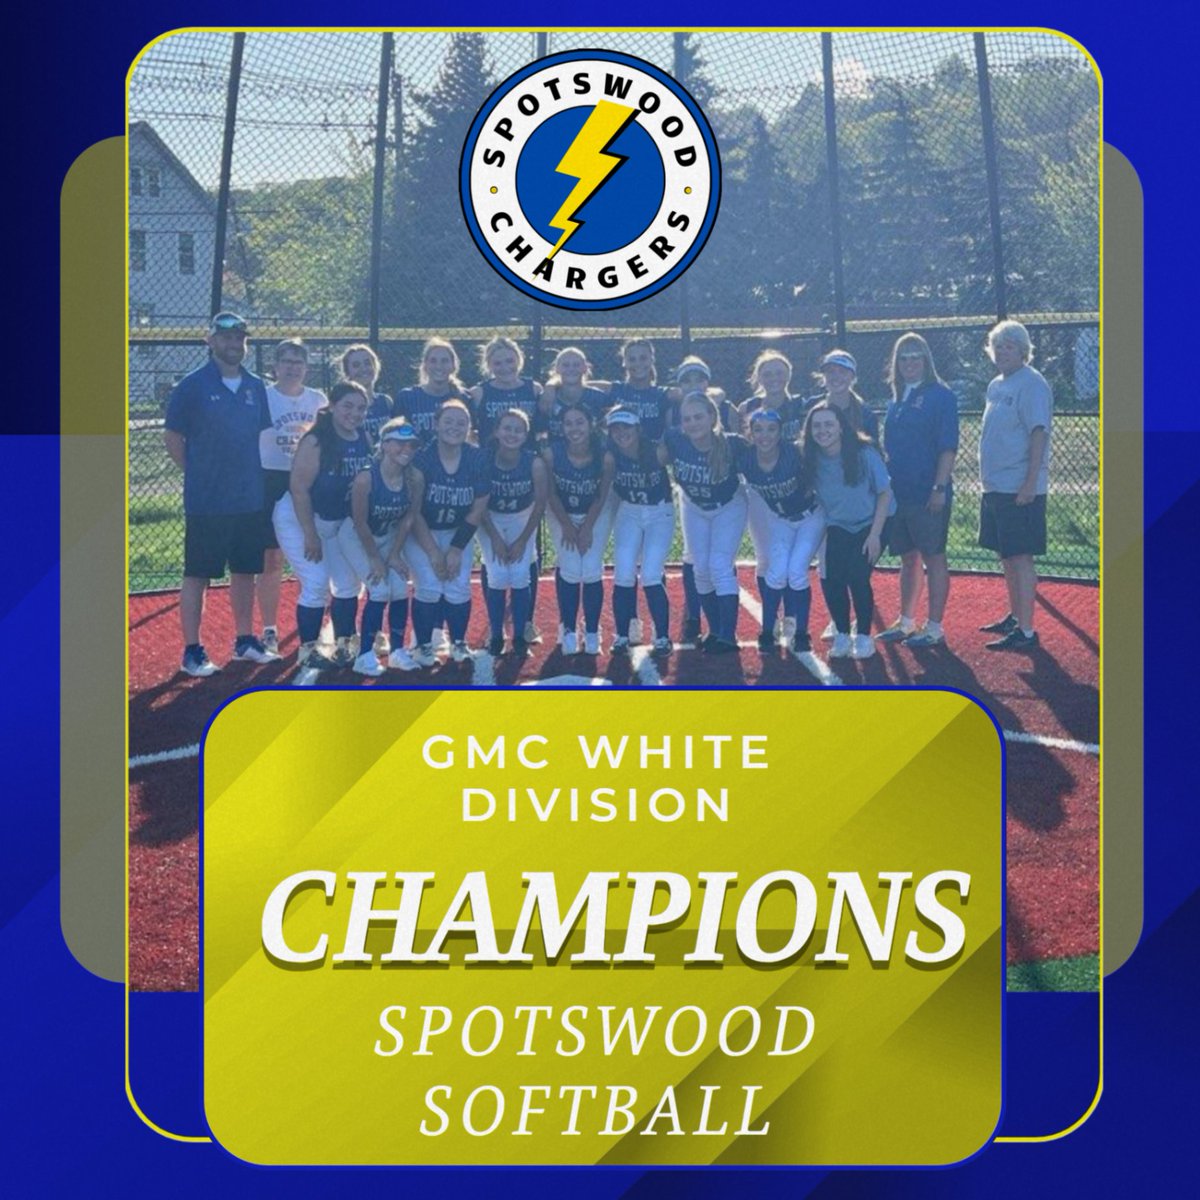 Congratulations to the Spotswood Softball Team who won the back-to-back white division championship and third in a row. highschoolsports.nj.com/game/917163